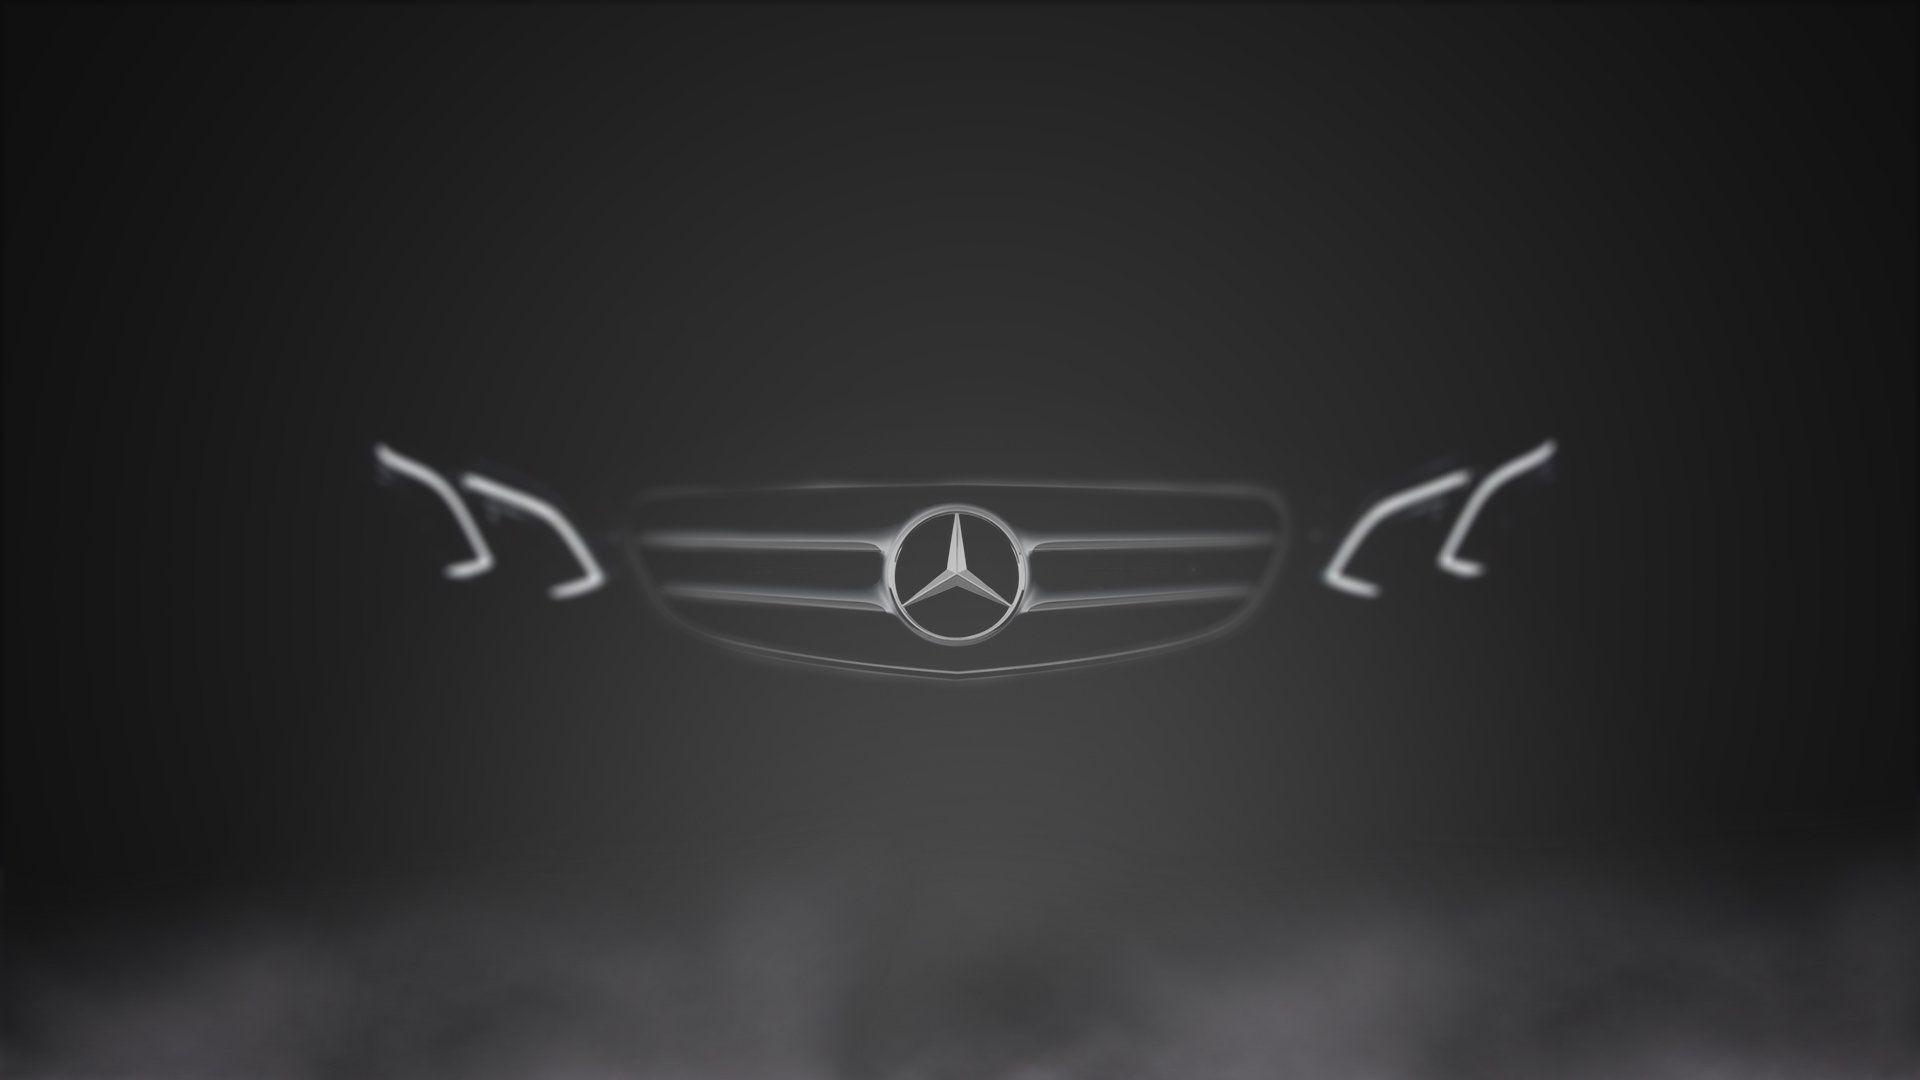 Mercedes Benz Wallpaper For Android